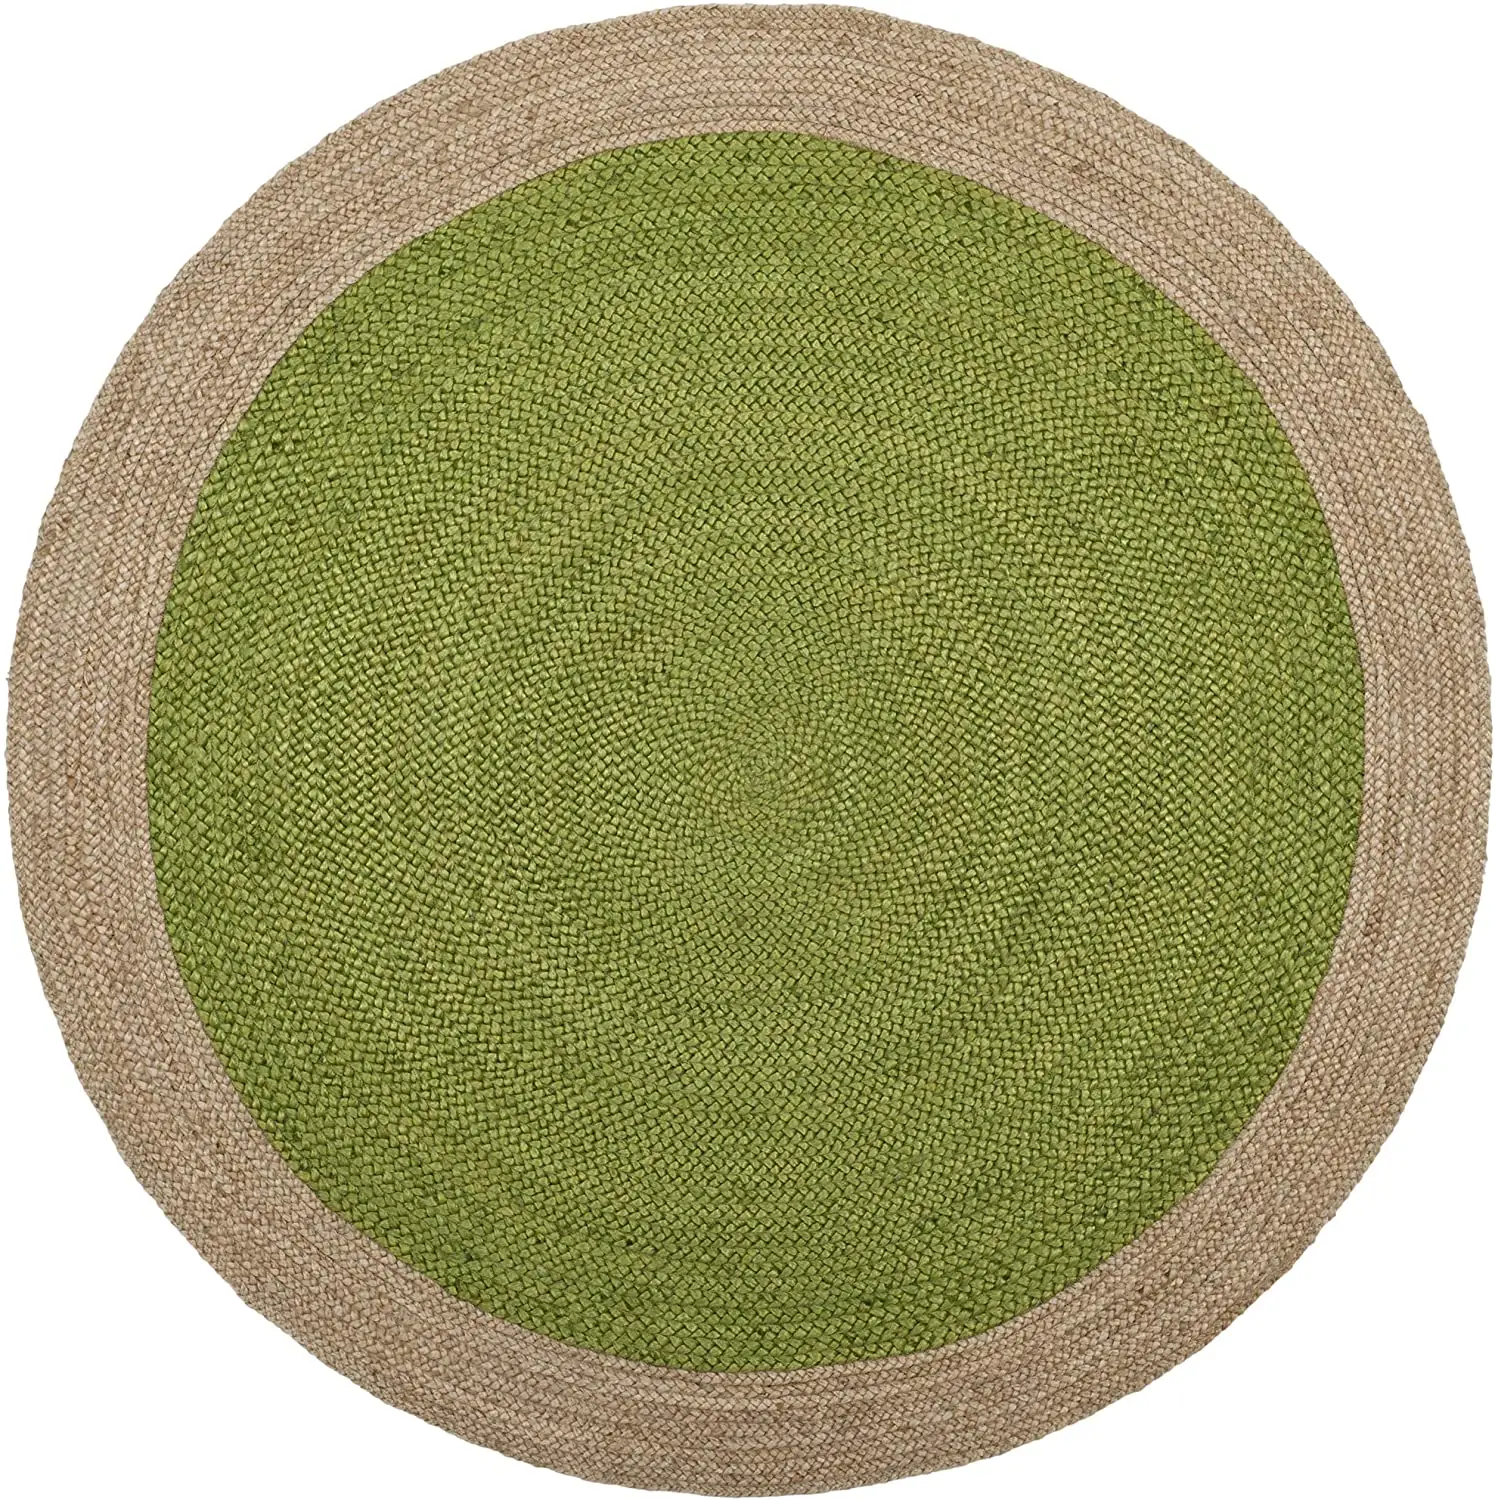 Natural Jute Hand Braided Round Green and Beige Color Rug